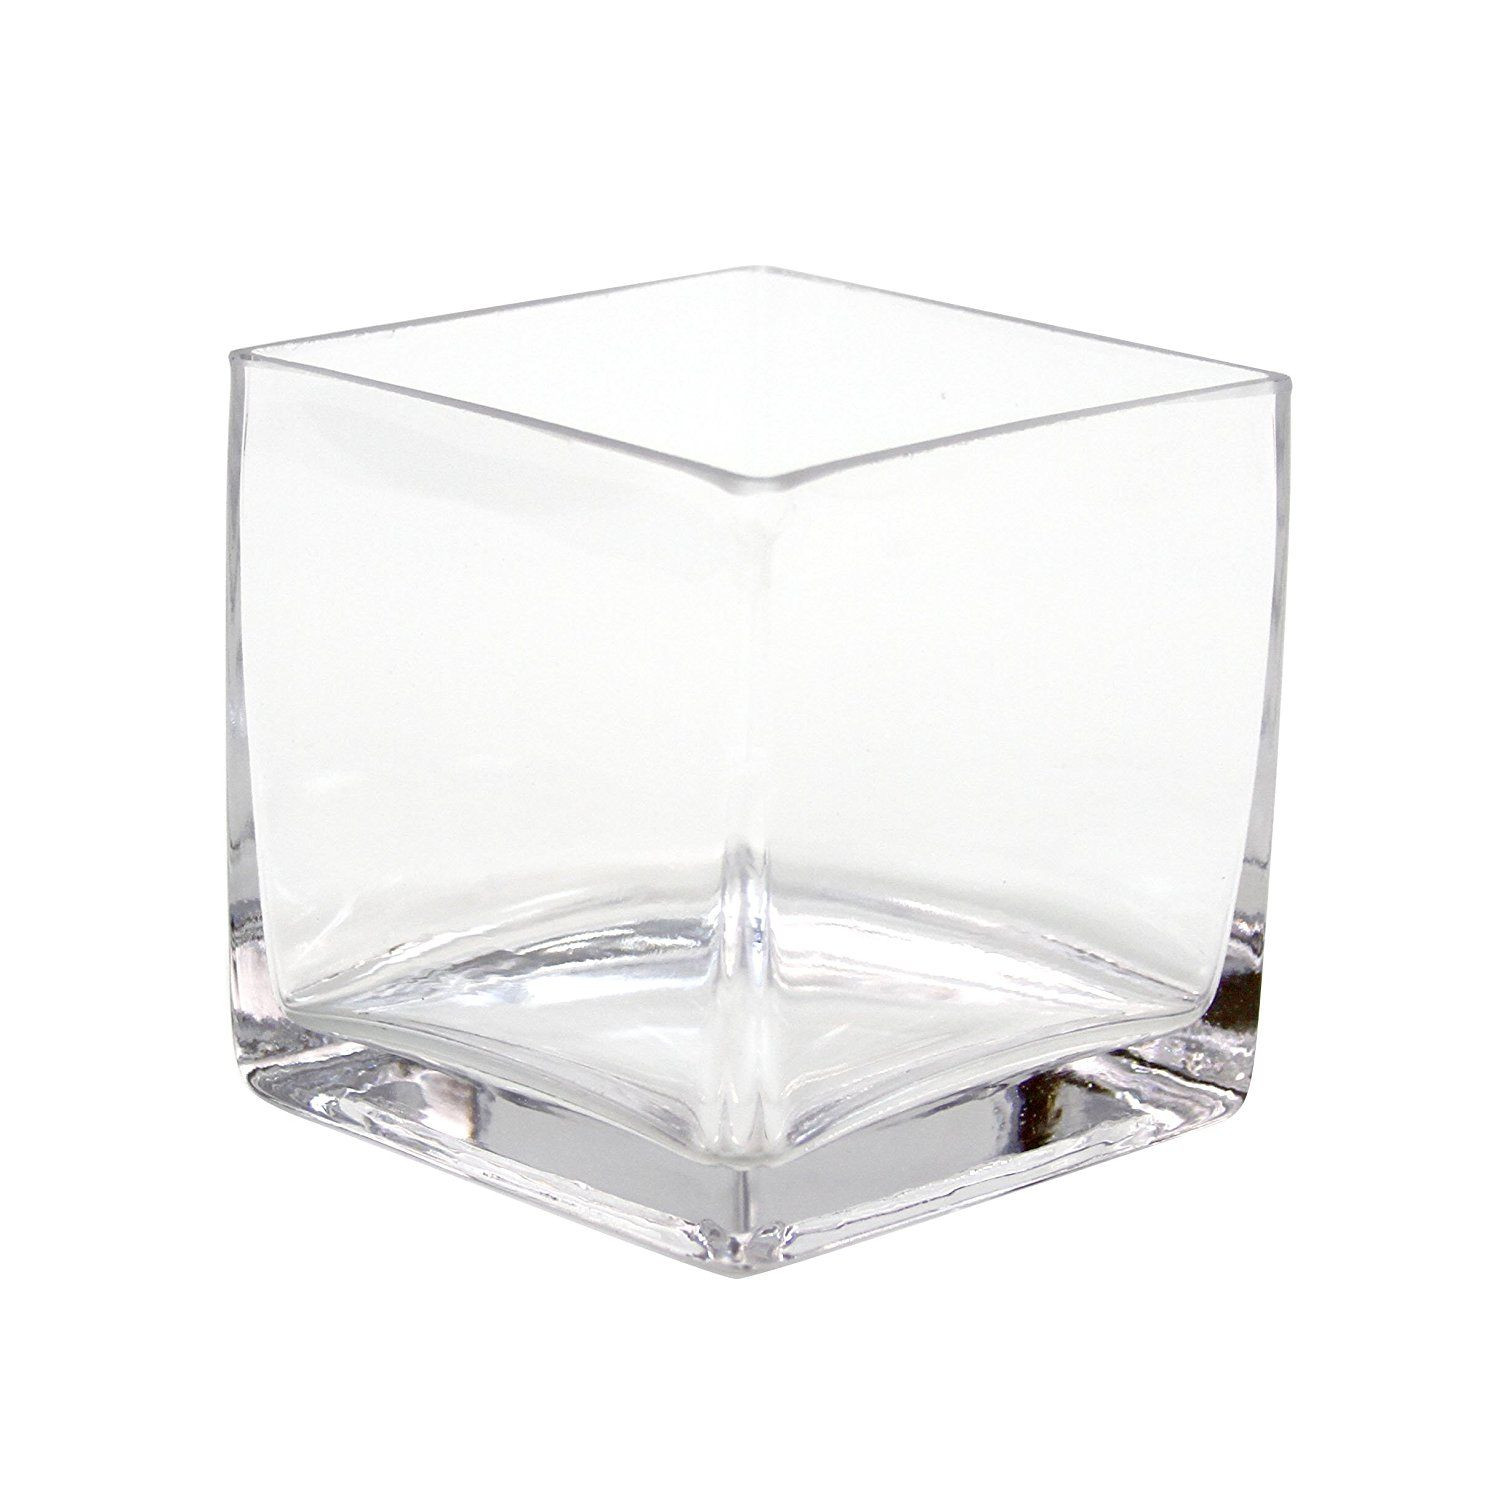 10 Perfect Square Glass Bud Vase 2024 free download square glass bud vase of koyal wholesale 404343 12 pack cube square glass vases 4 by 4 by 4 inside glass